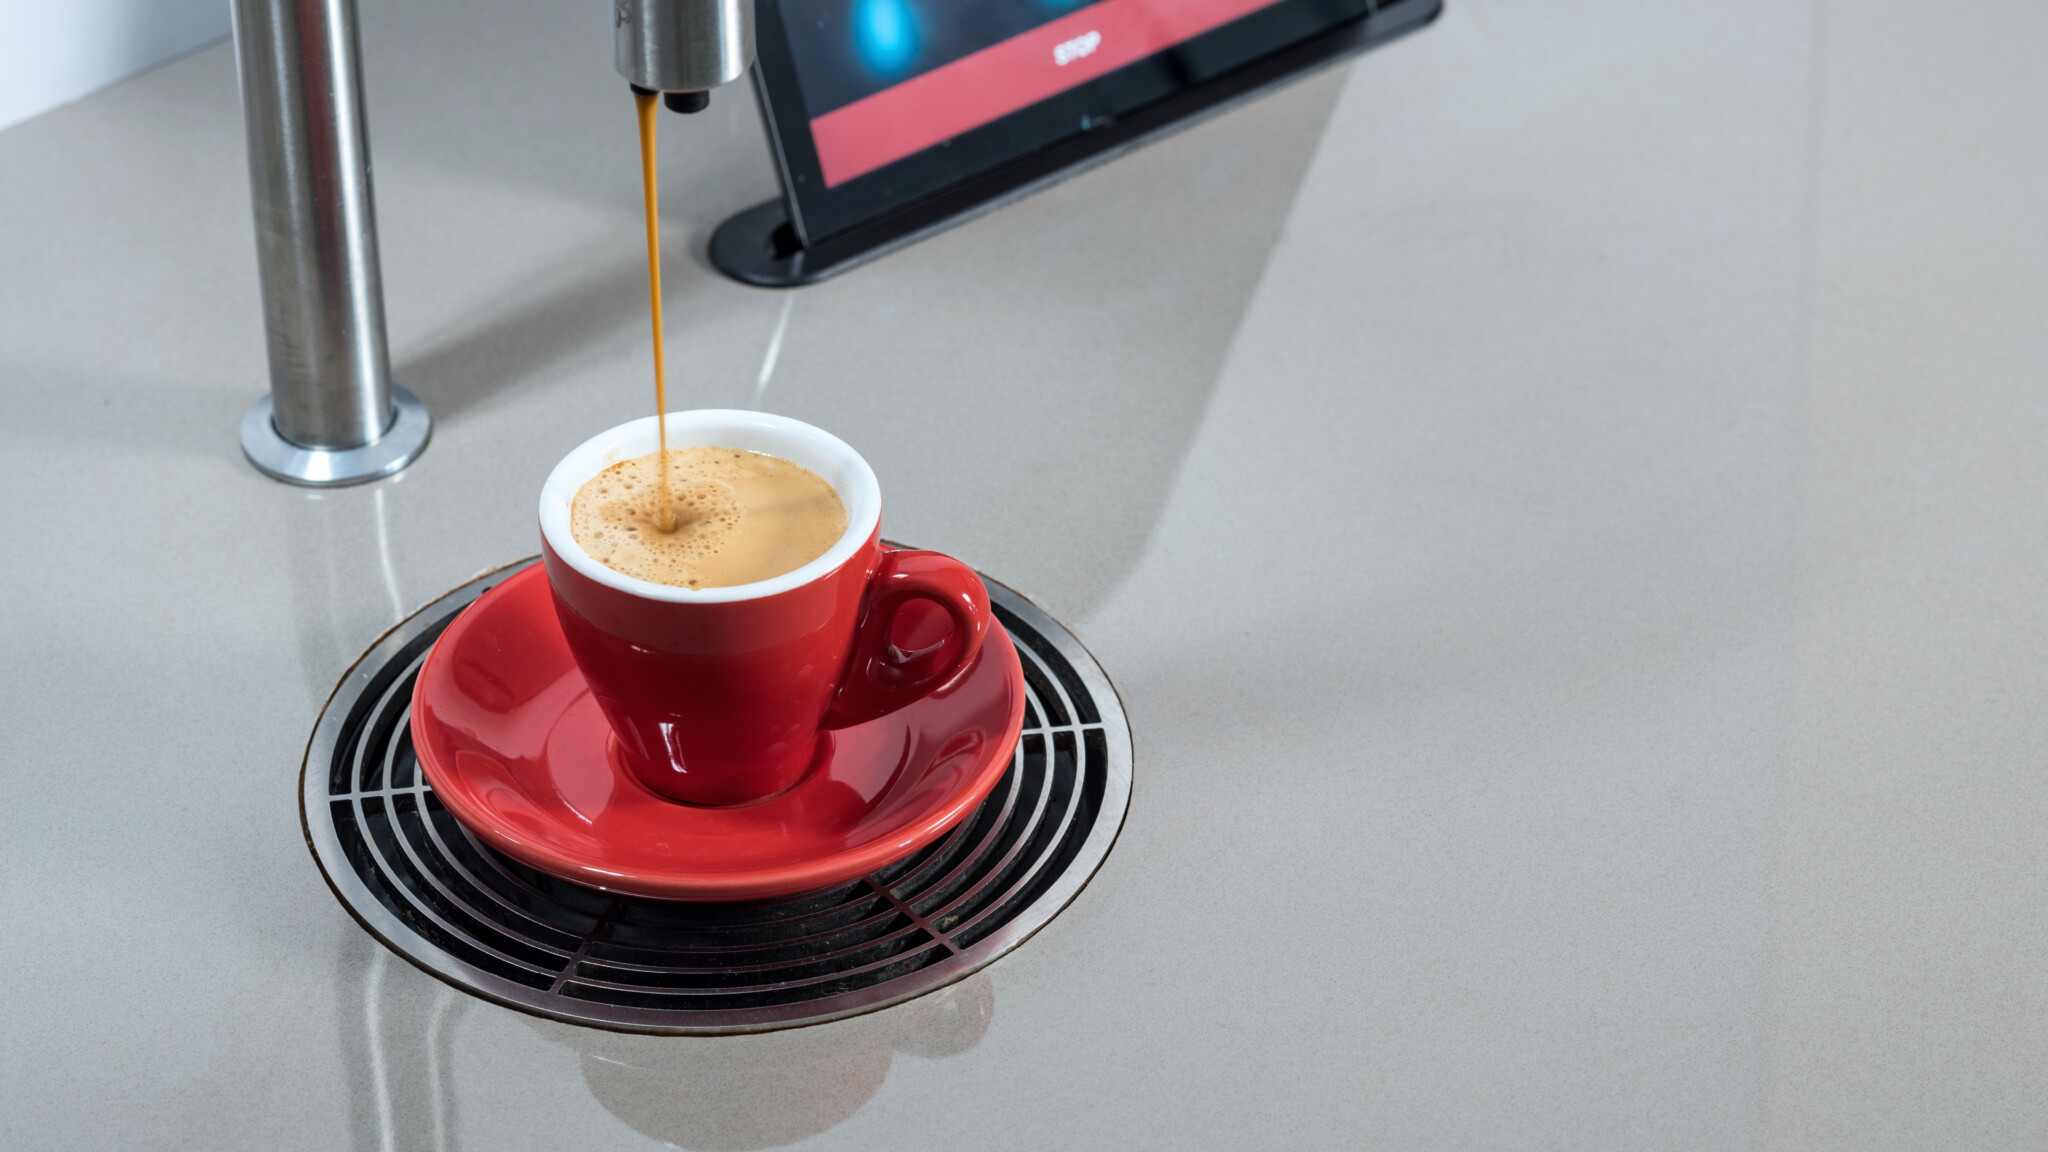 TopBrewer Office Coffee machine with self serve iPad interface delivering a perfect cup of coffee